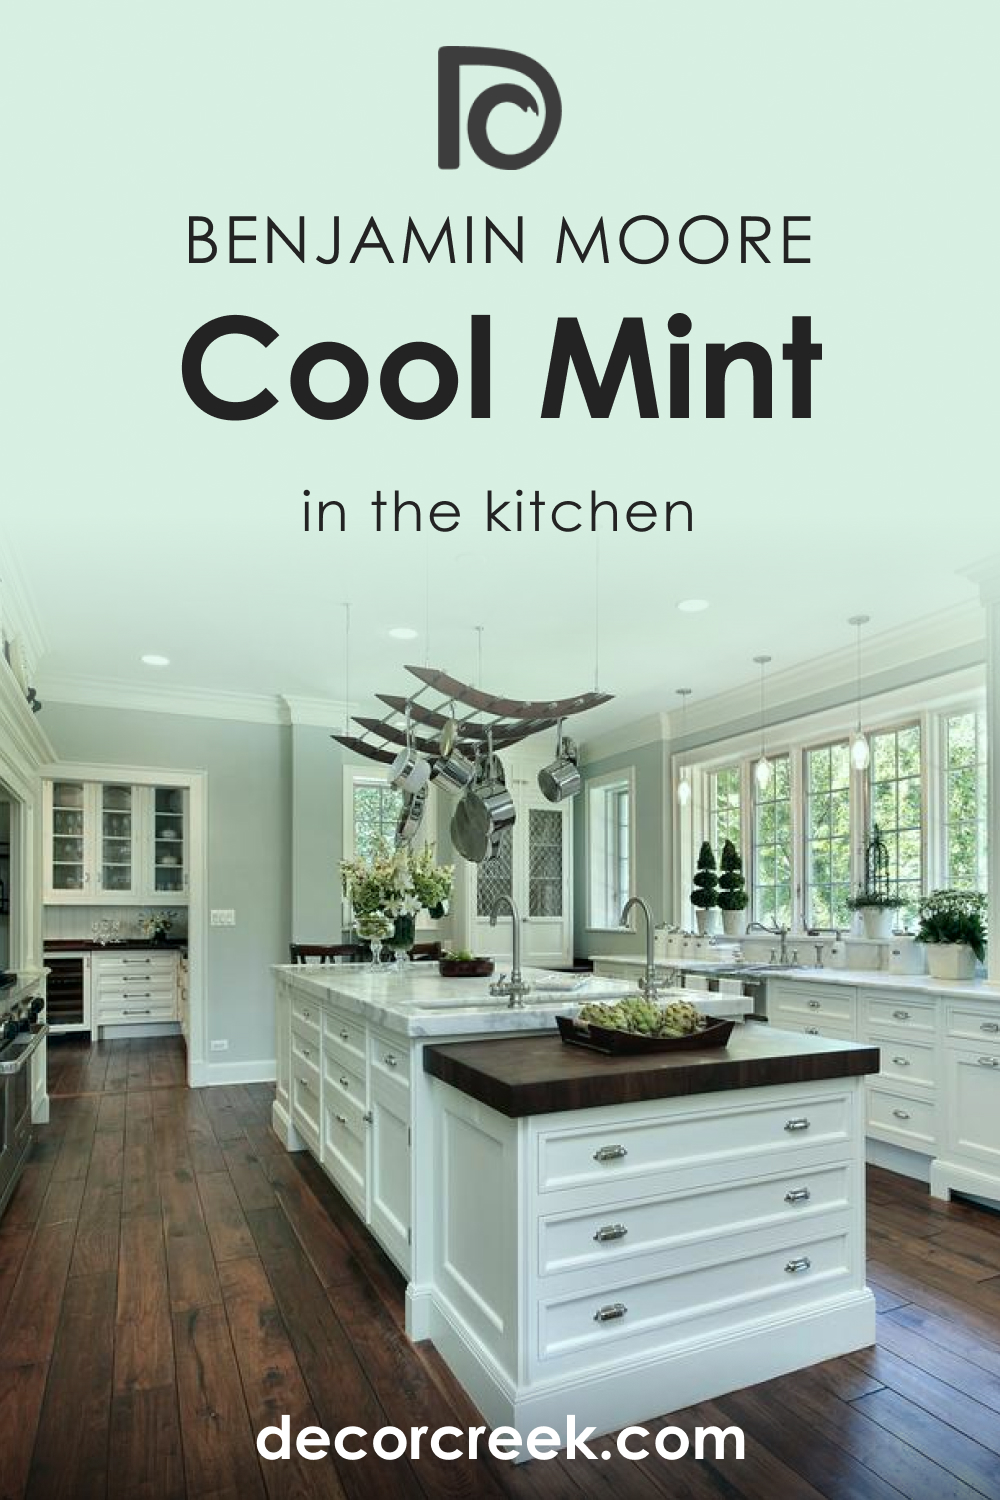 How to Use Cool Mint 582 in the Kitchen?